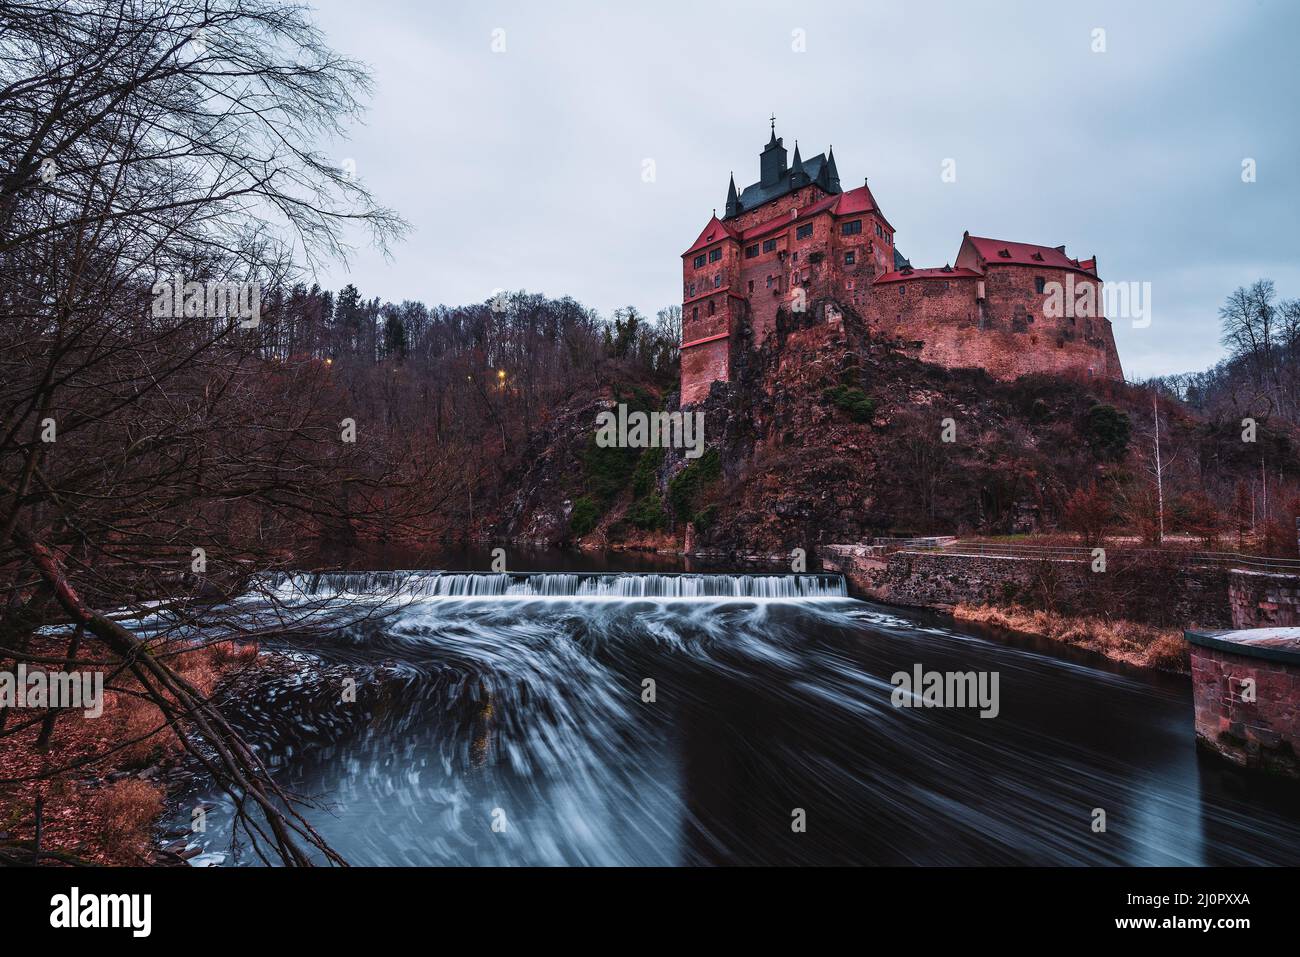 Panoramic view of the knight castle Kriebstein Stock Photo